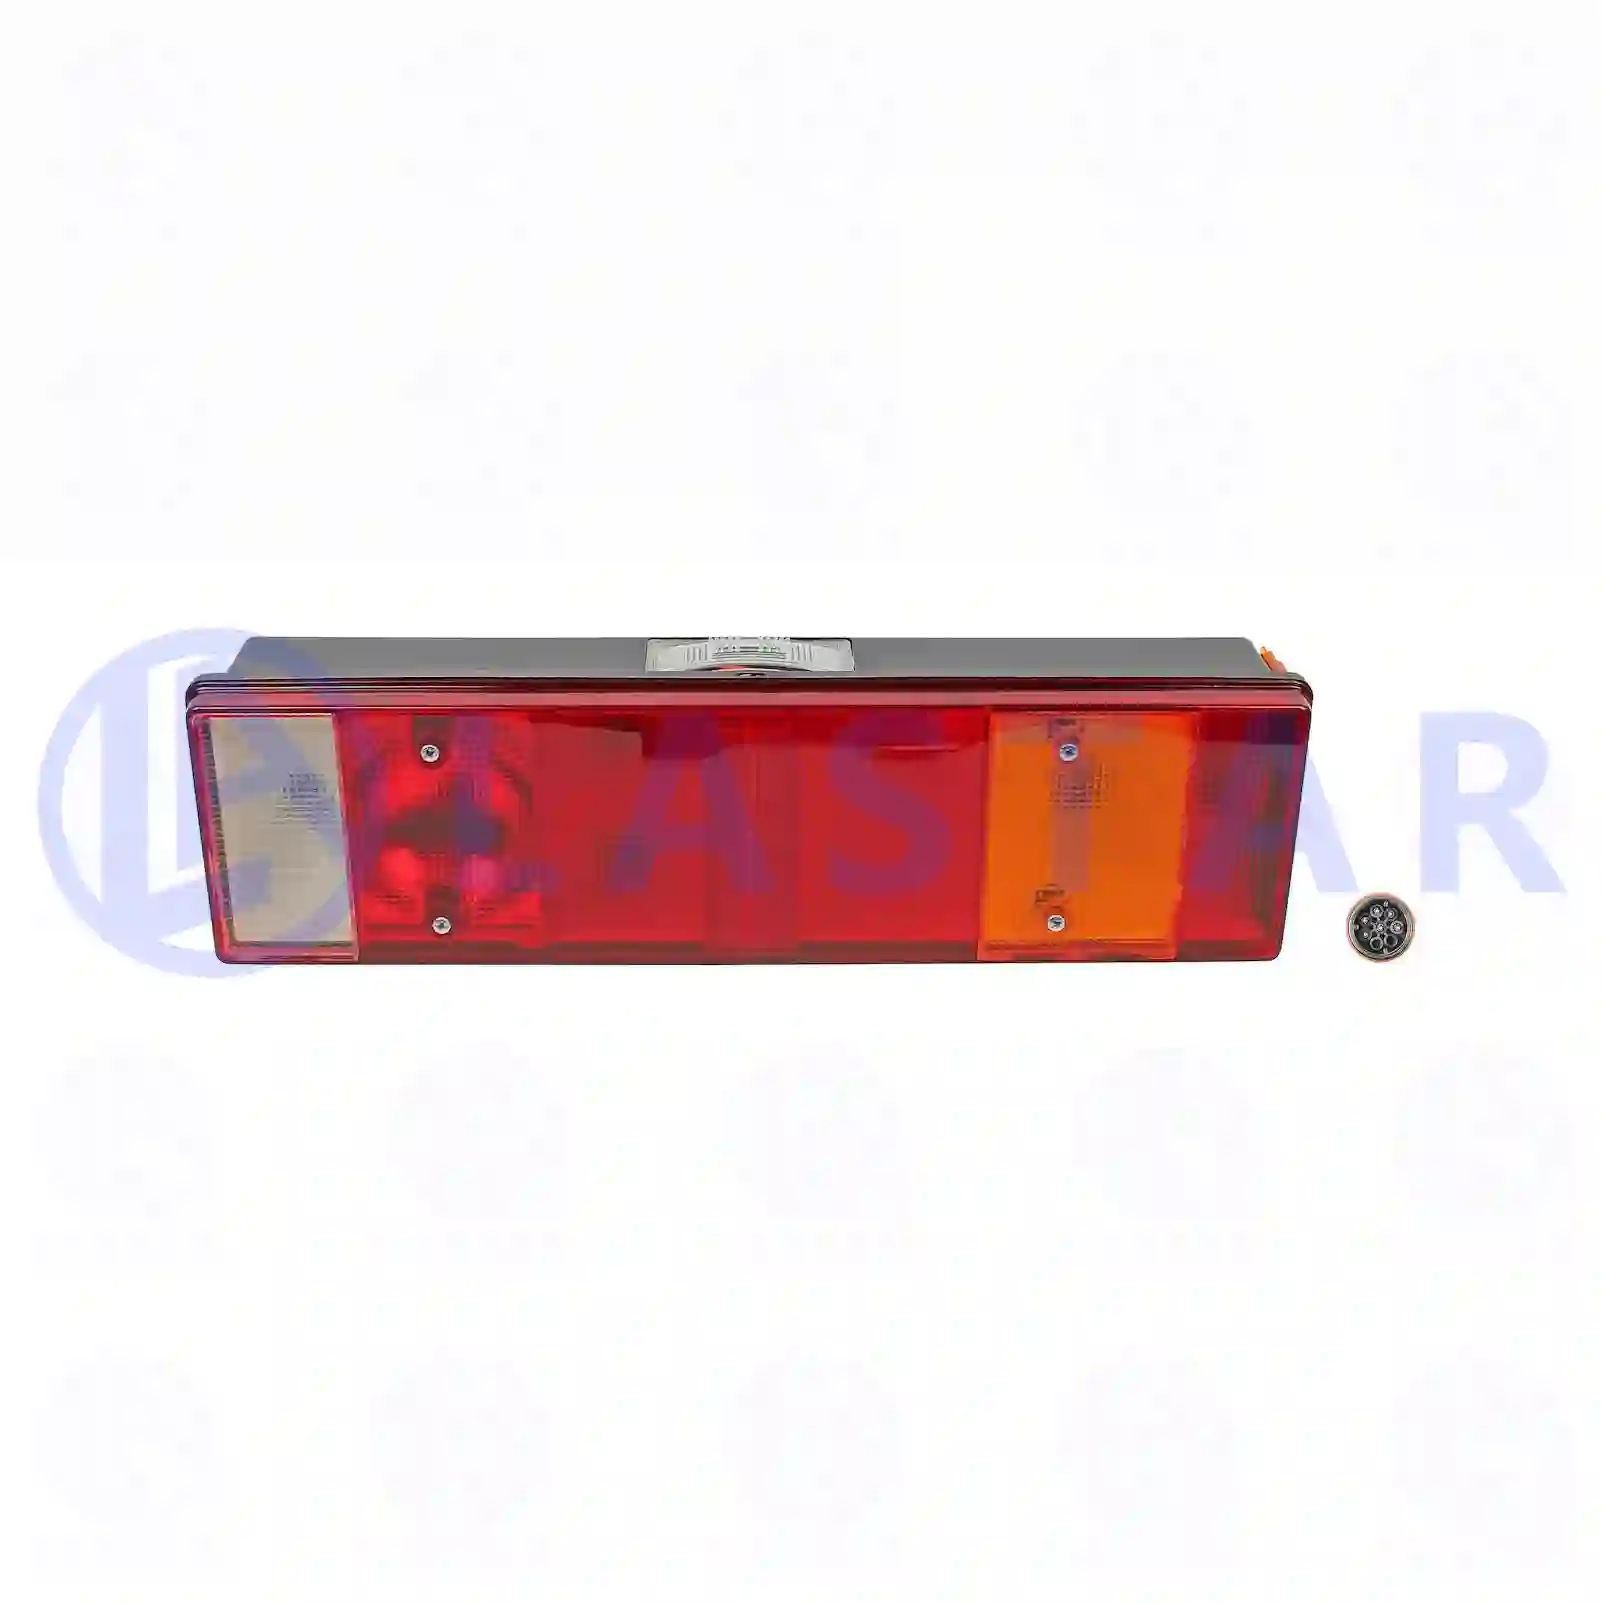 Tail lamp, left, 77712563, 1283371, 1284211, 1291216, 1304789, ZG21010-0008, ||  77712563 Lastar Spare Part | Truck Spare Parts, Auotomotive Spare Parts Tail lamp, left, 77712563, 1283371, 1284211, 1291216, 1304789, ZG21010-0008, ||  77712563 Lastar Spare Part | Truck Spare Parts, Auotomotive Spare Parts